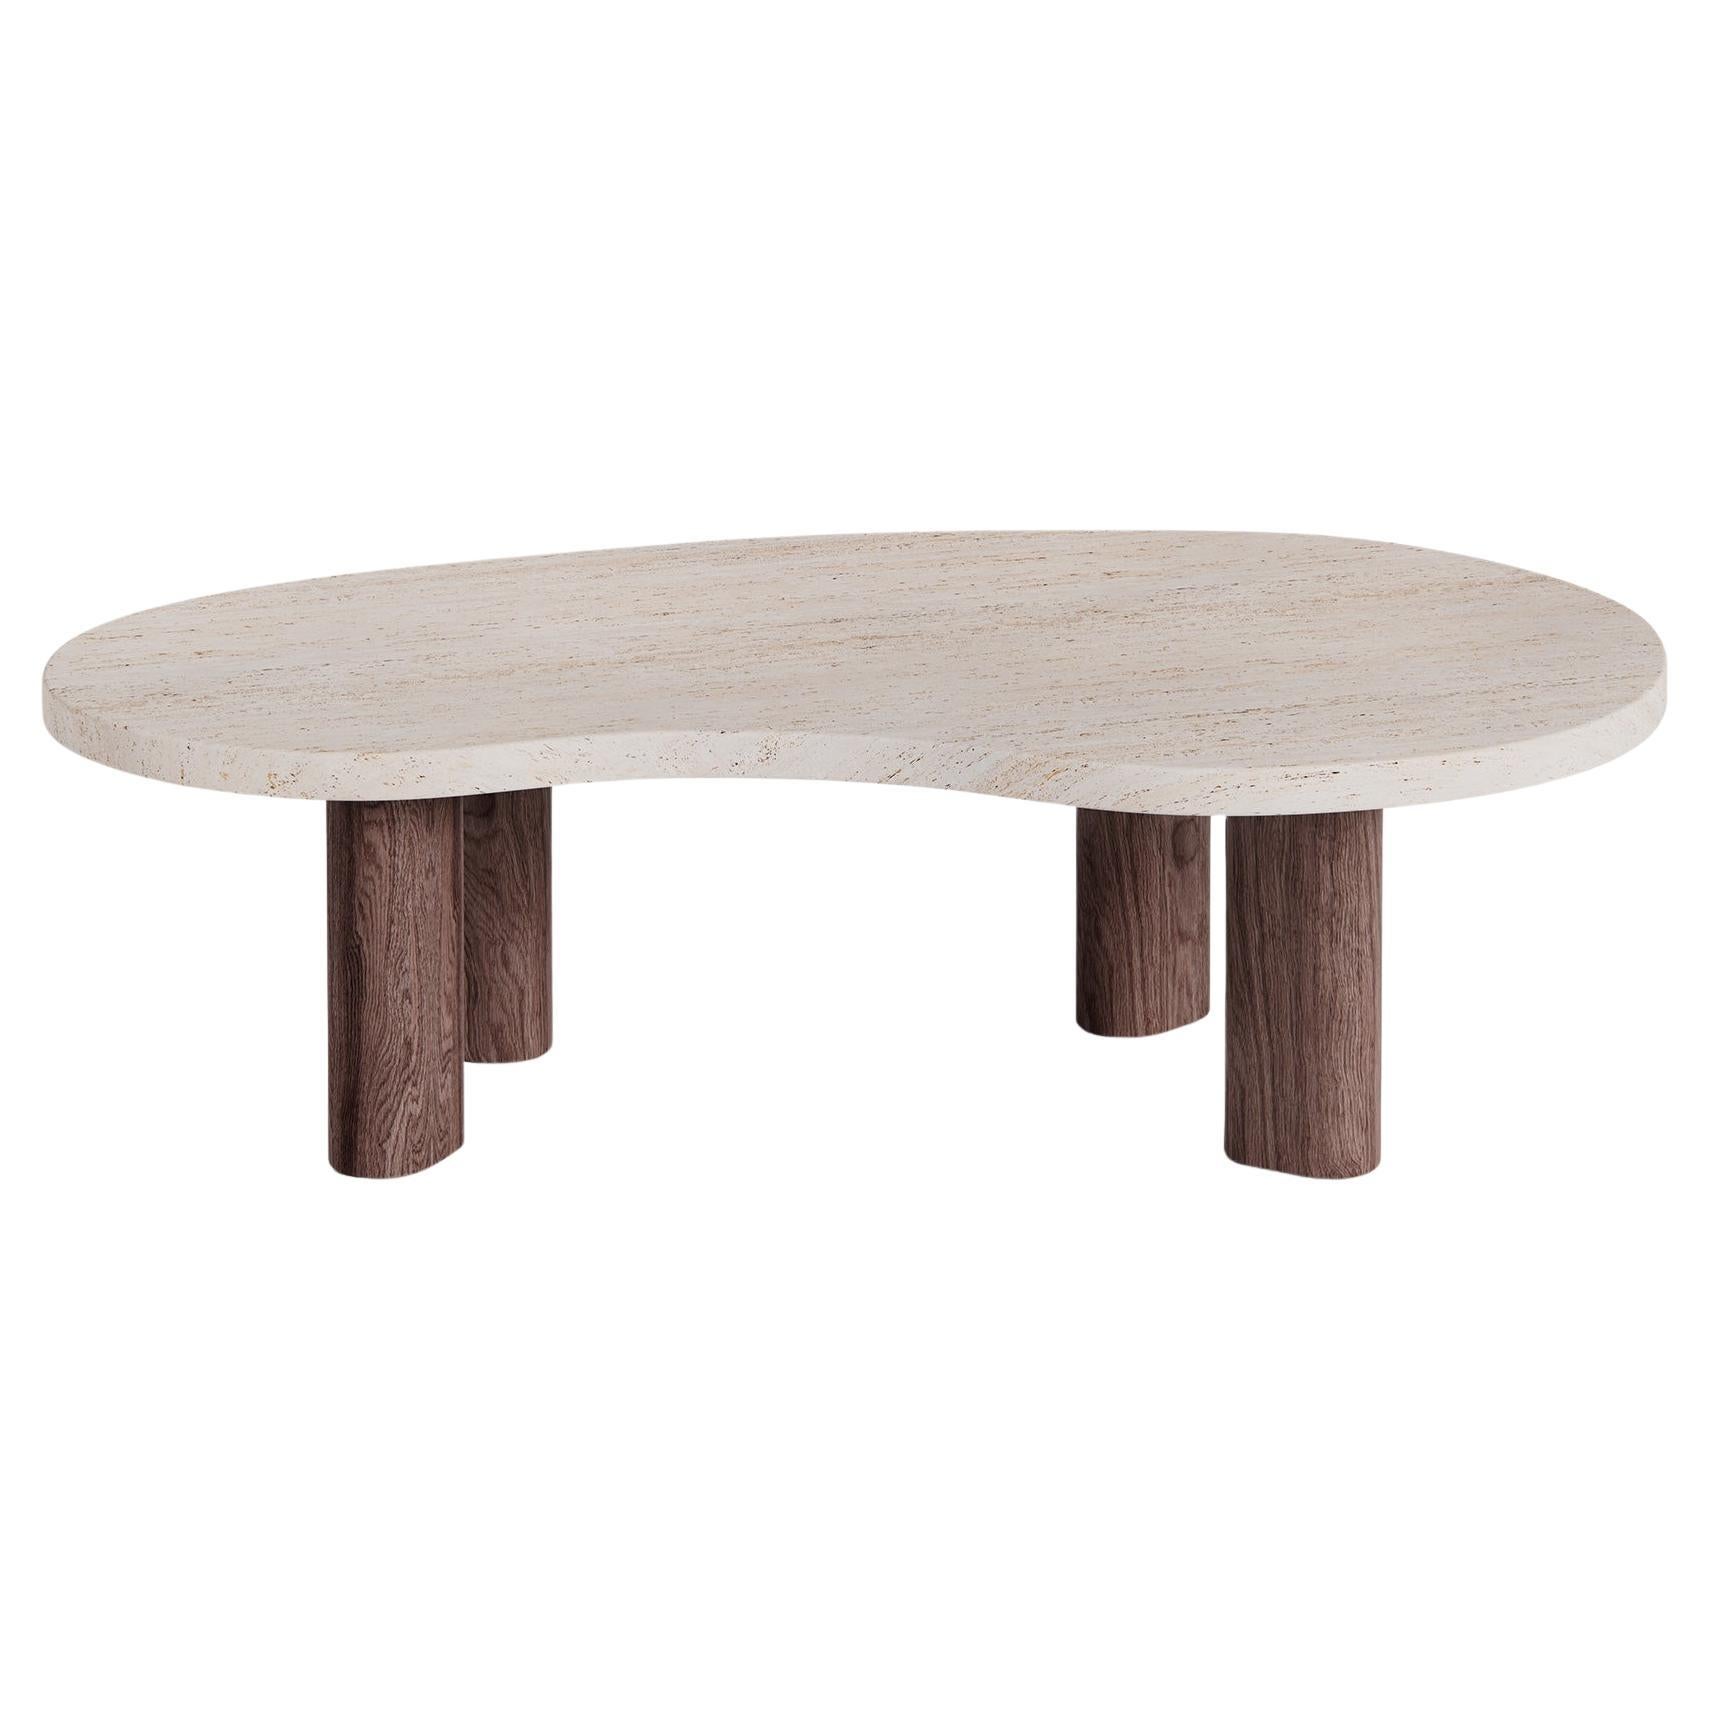 Rene Coffee Table by Just Adele in Travertine and Walnut Stained Timber For Sale